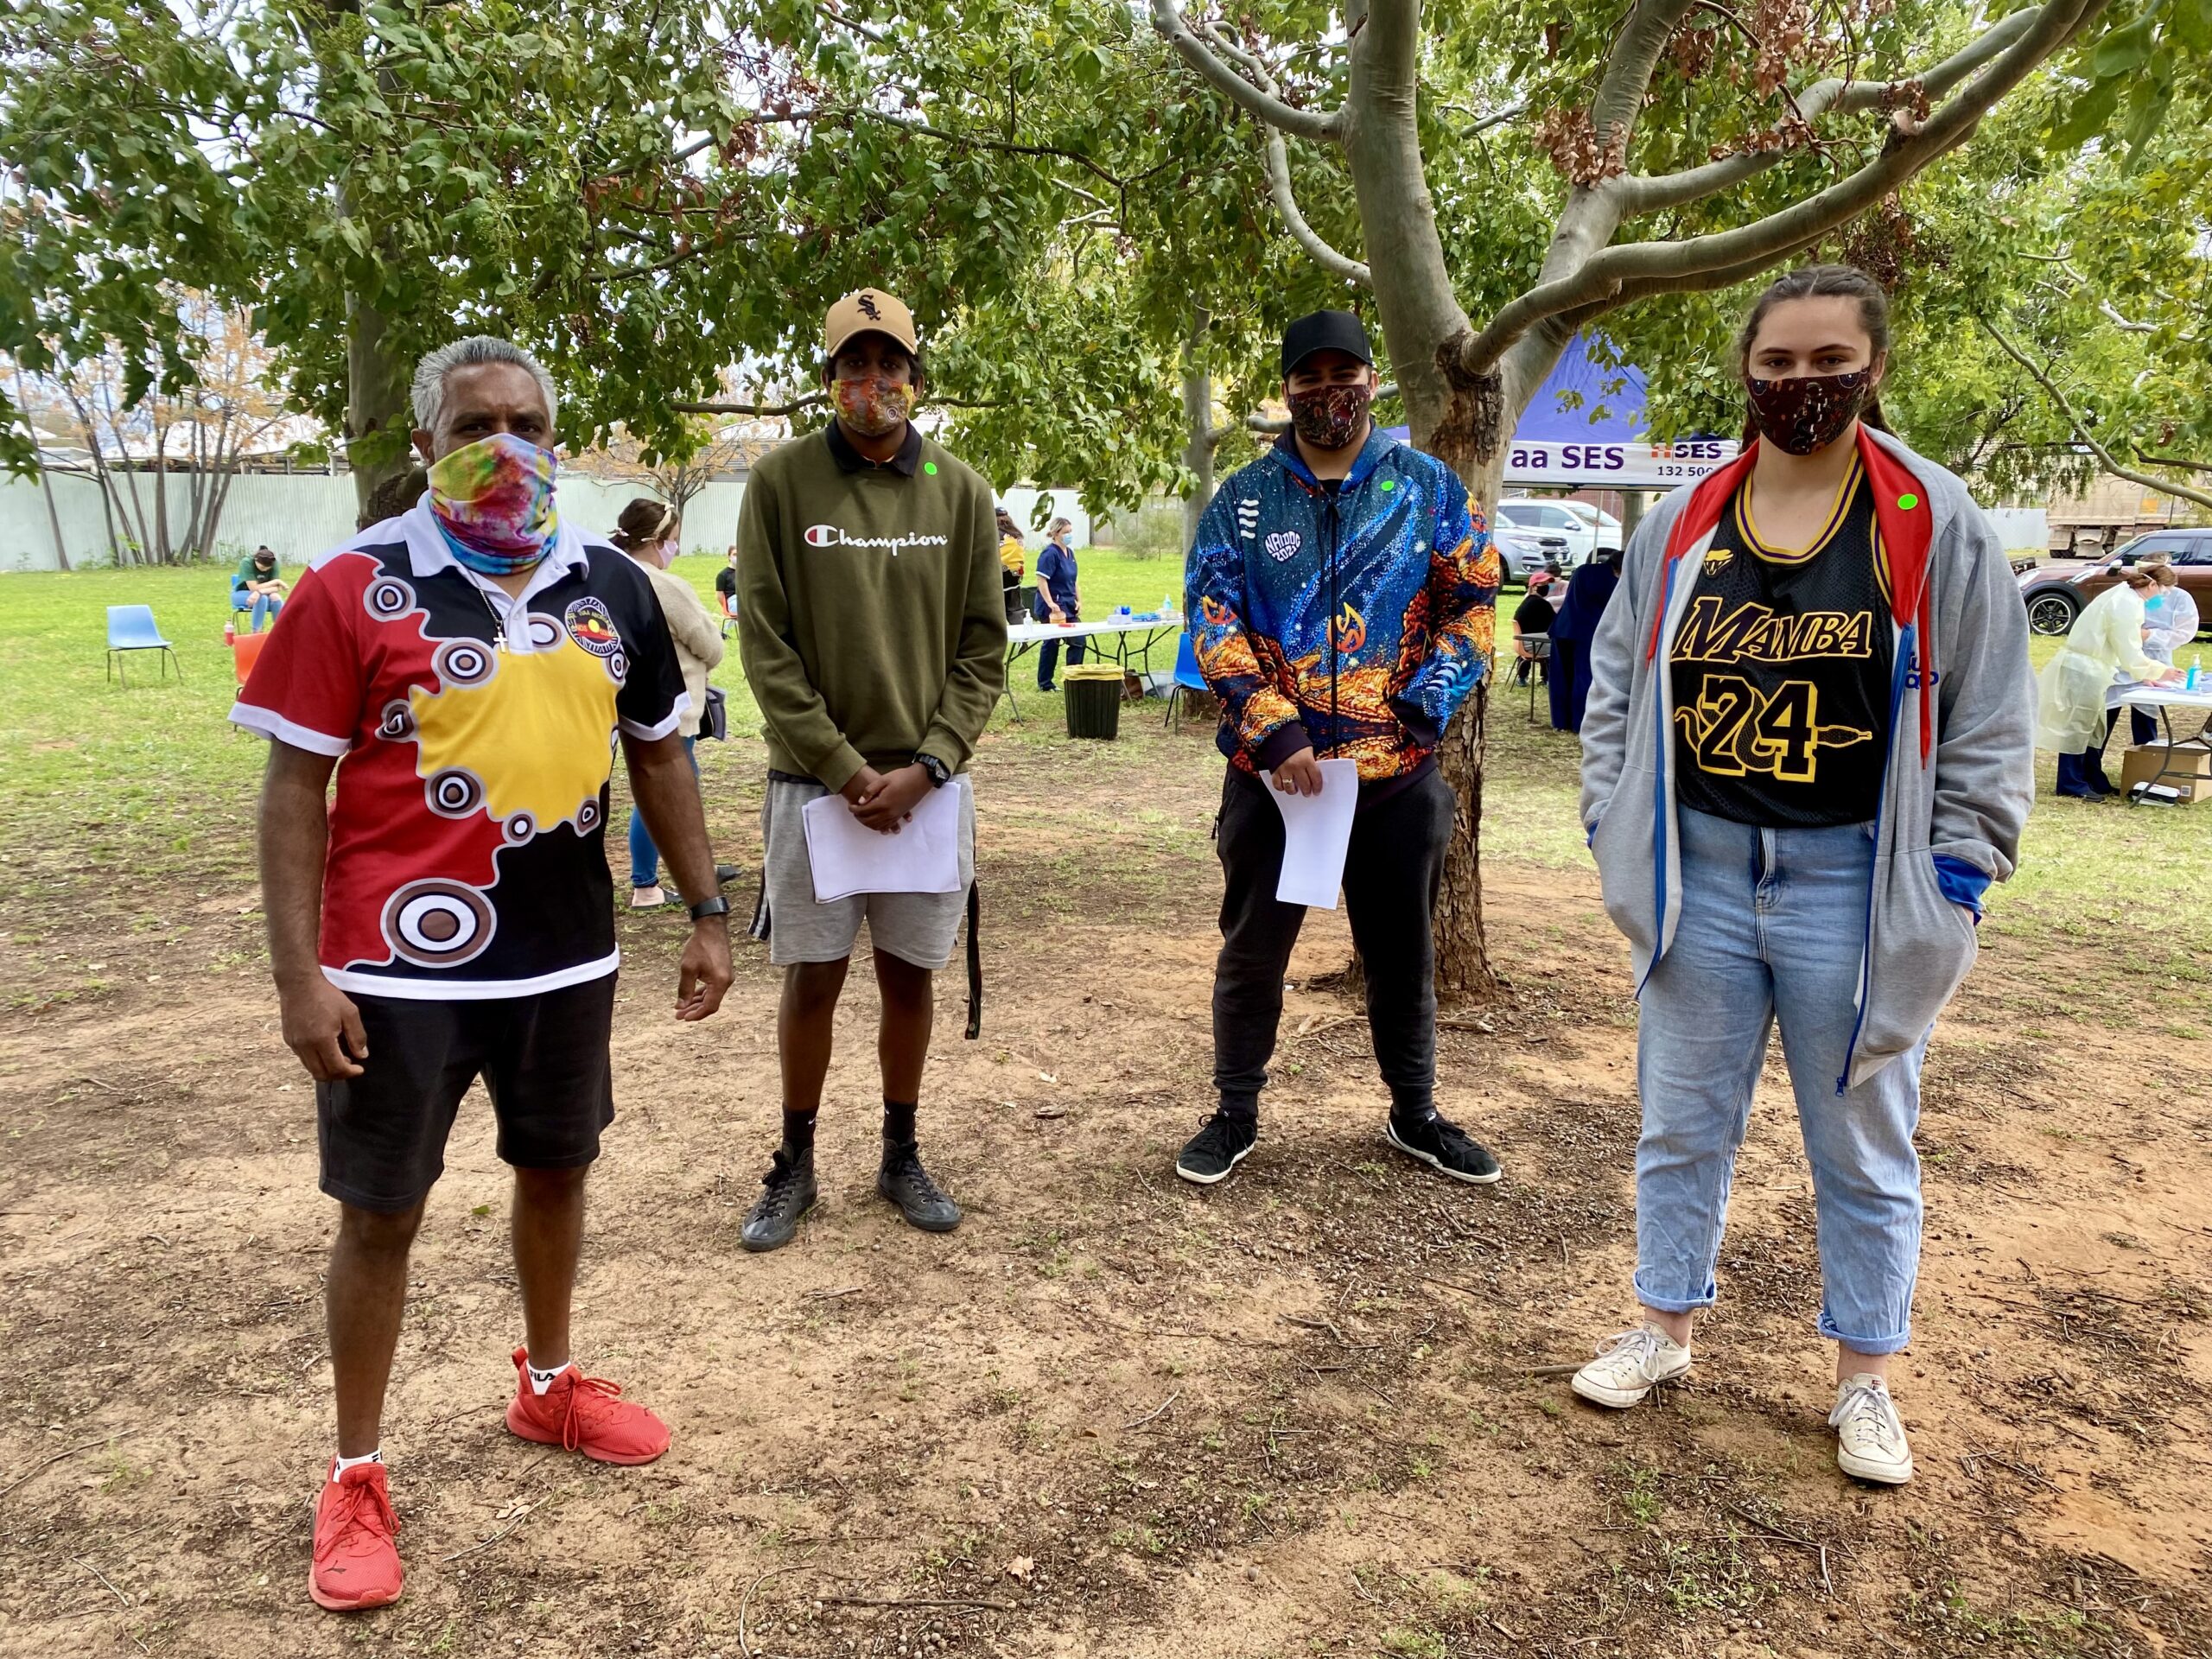 Wee Waa Local Aboriginal Land Council chair Clifford Toomey with his son Clifford Toomey Jnr and Jermaine Toomey and Vanessa Smallwood who all rolled up their sleeves to get the vaccination on Saturday.